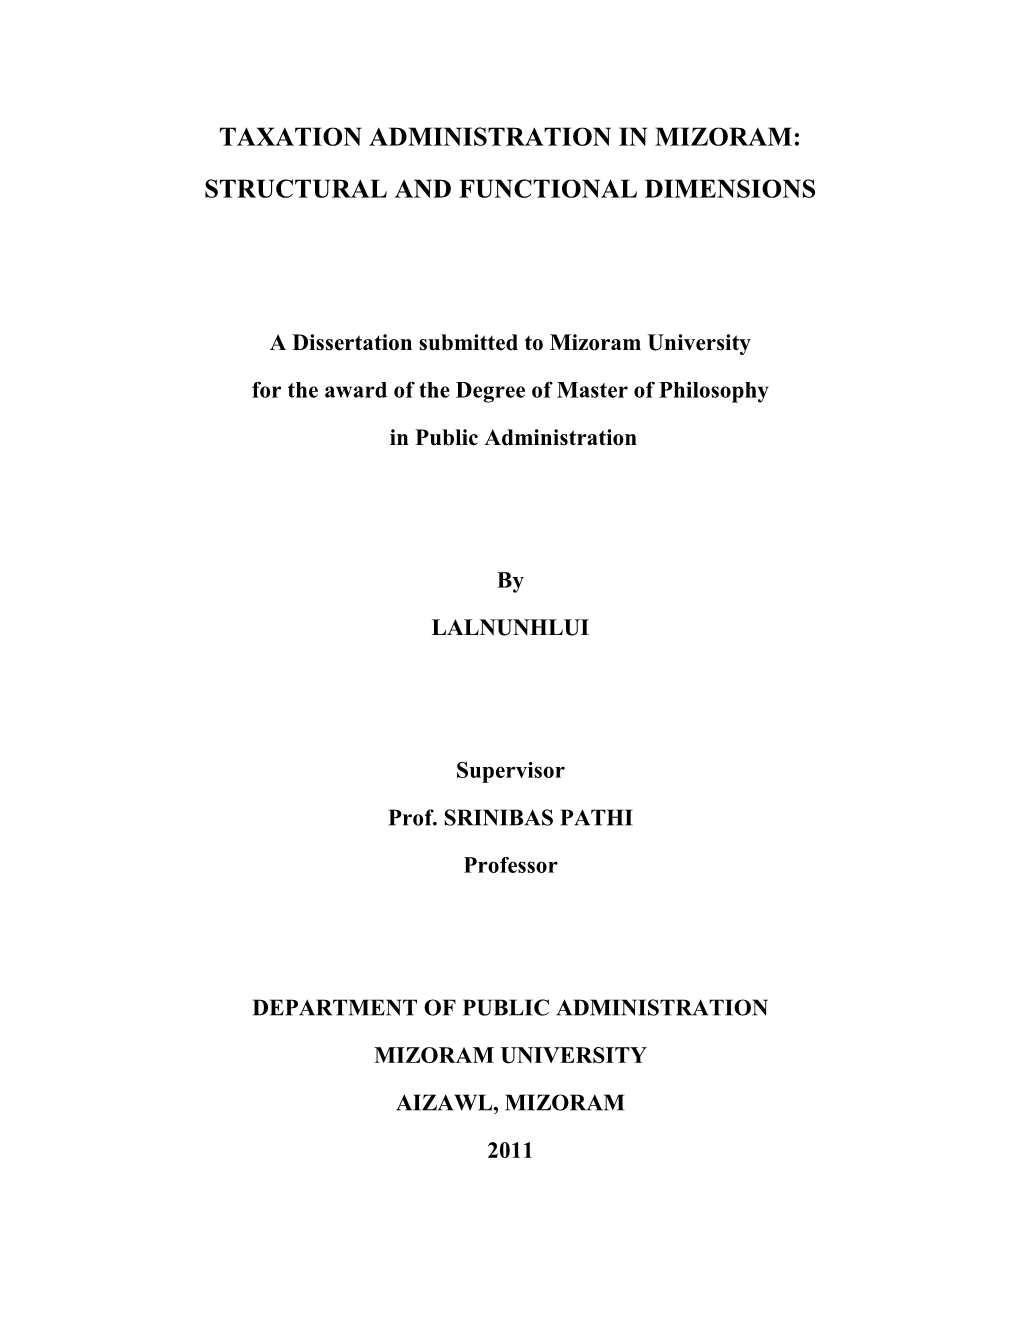 Taxation Administration in Mizoram: Structural and Functional Dimensions